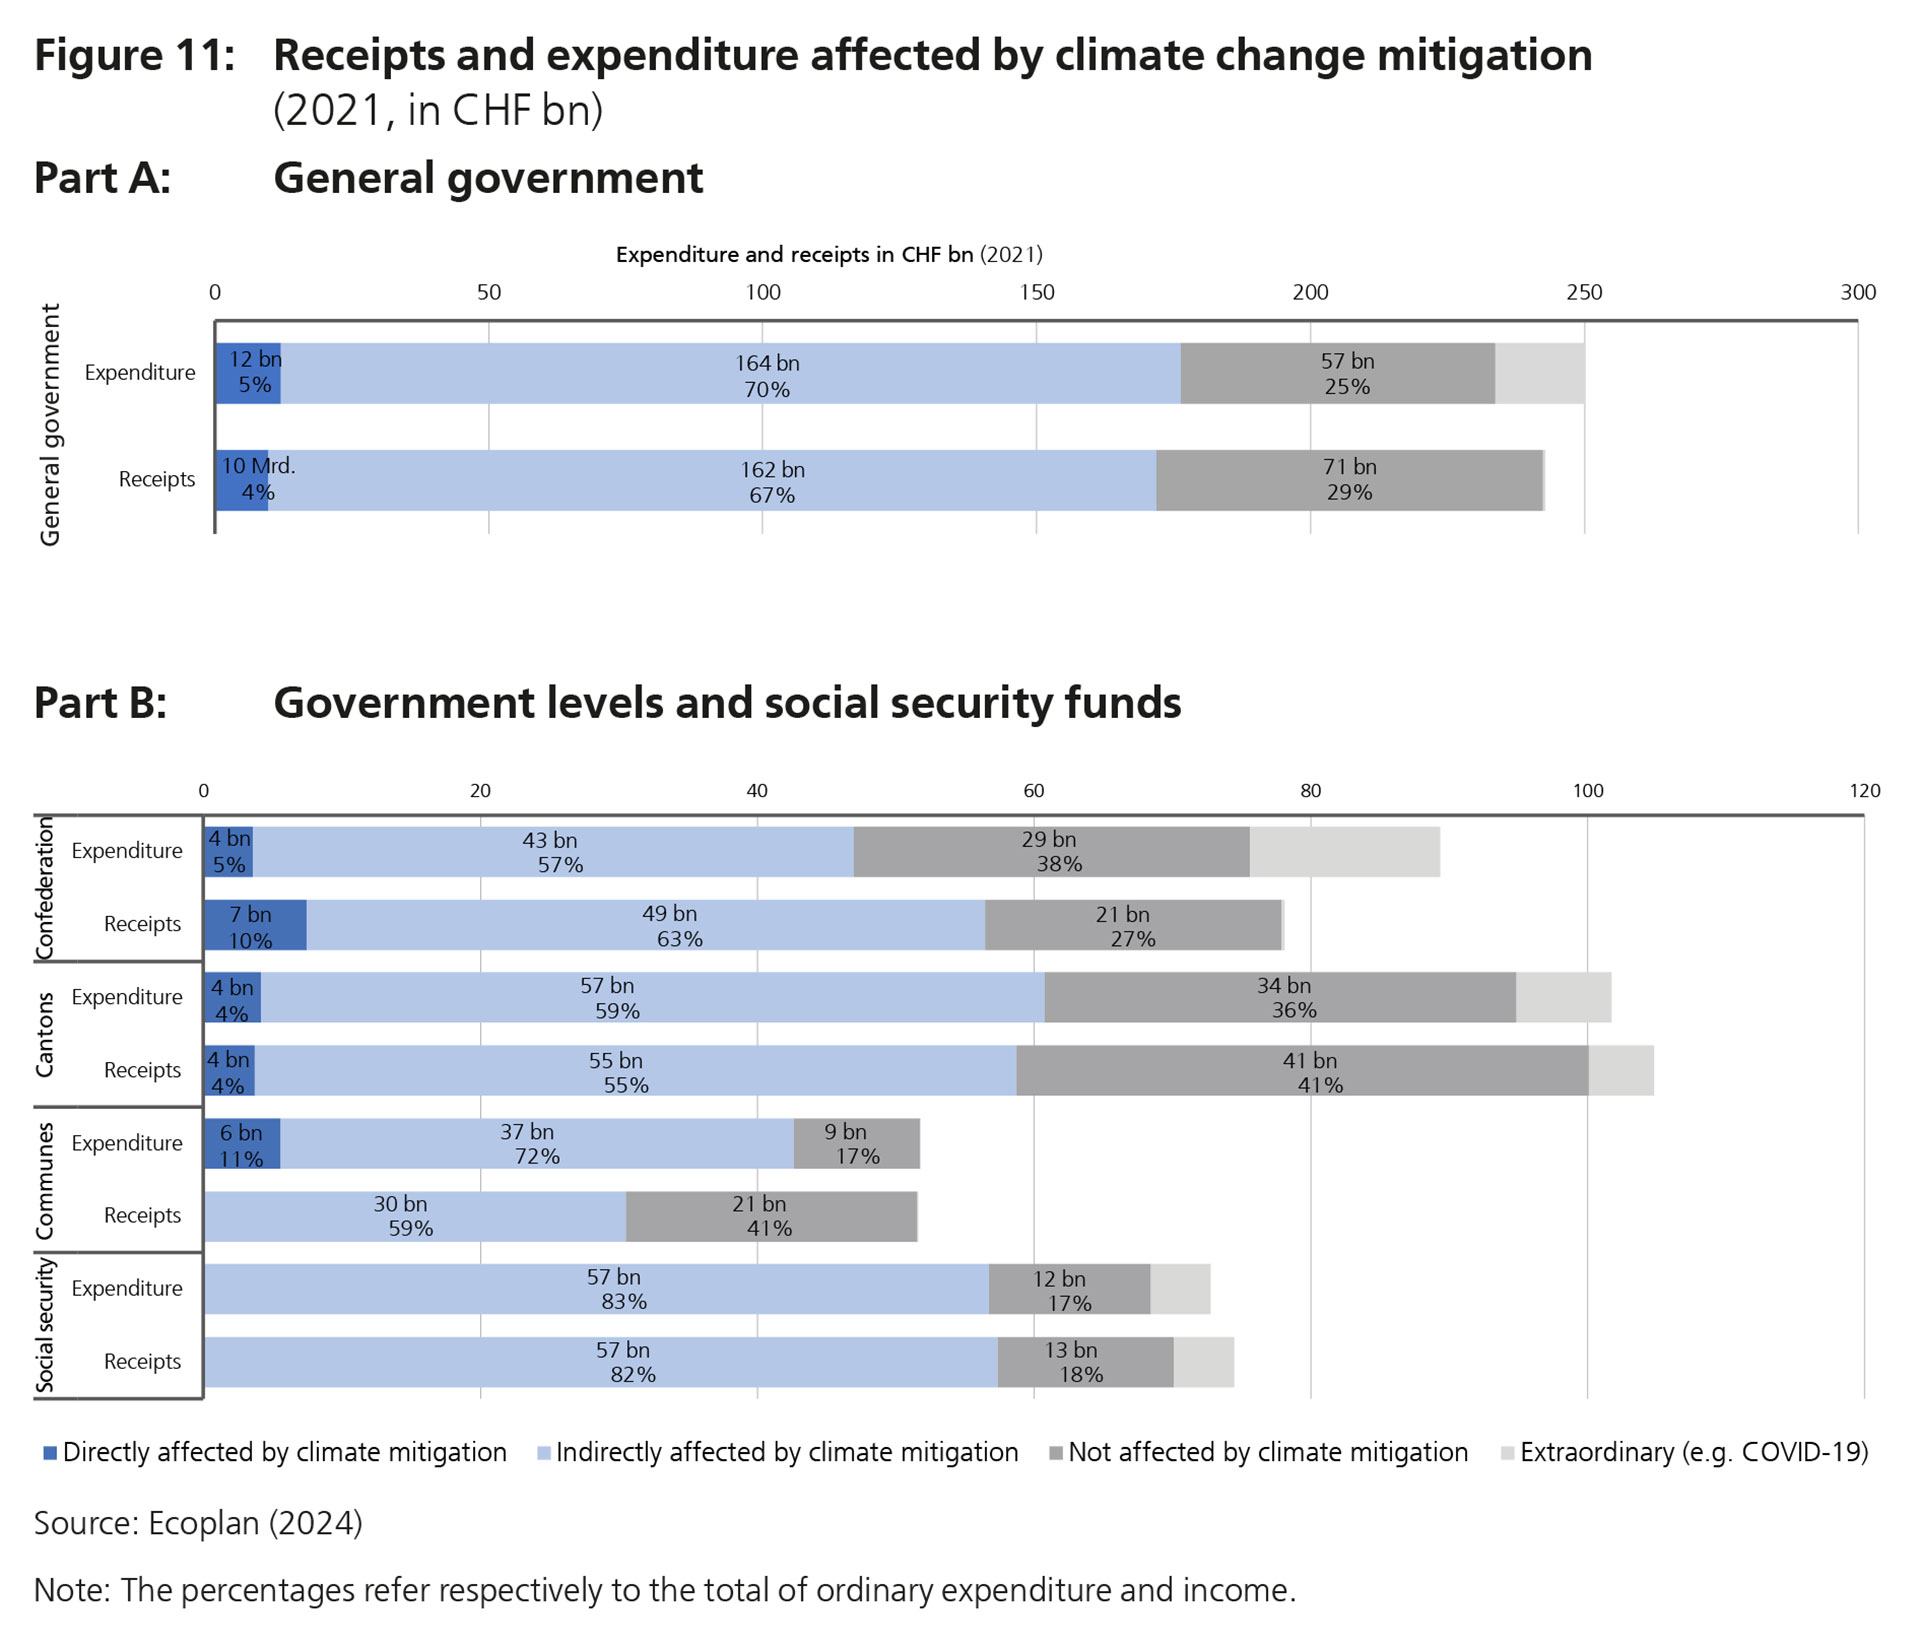 Receipts and expenditure affected by climate change mitigation